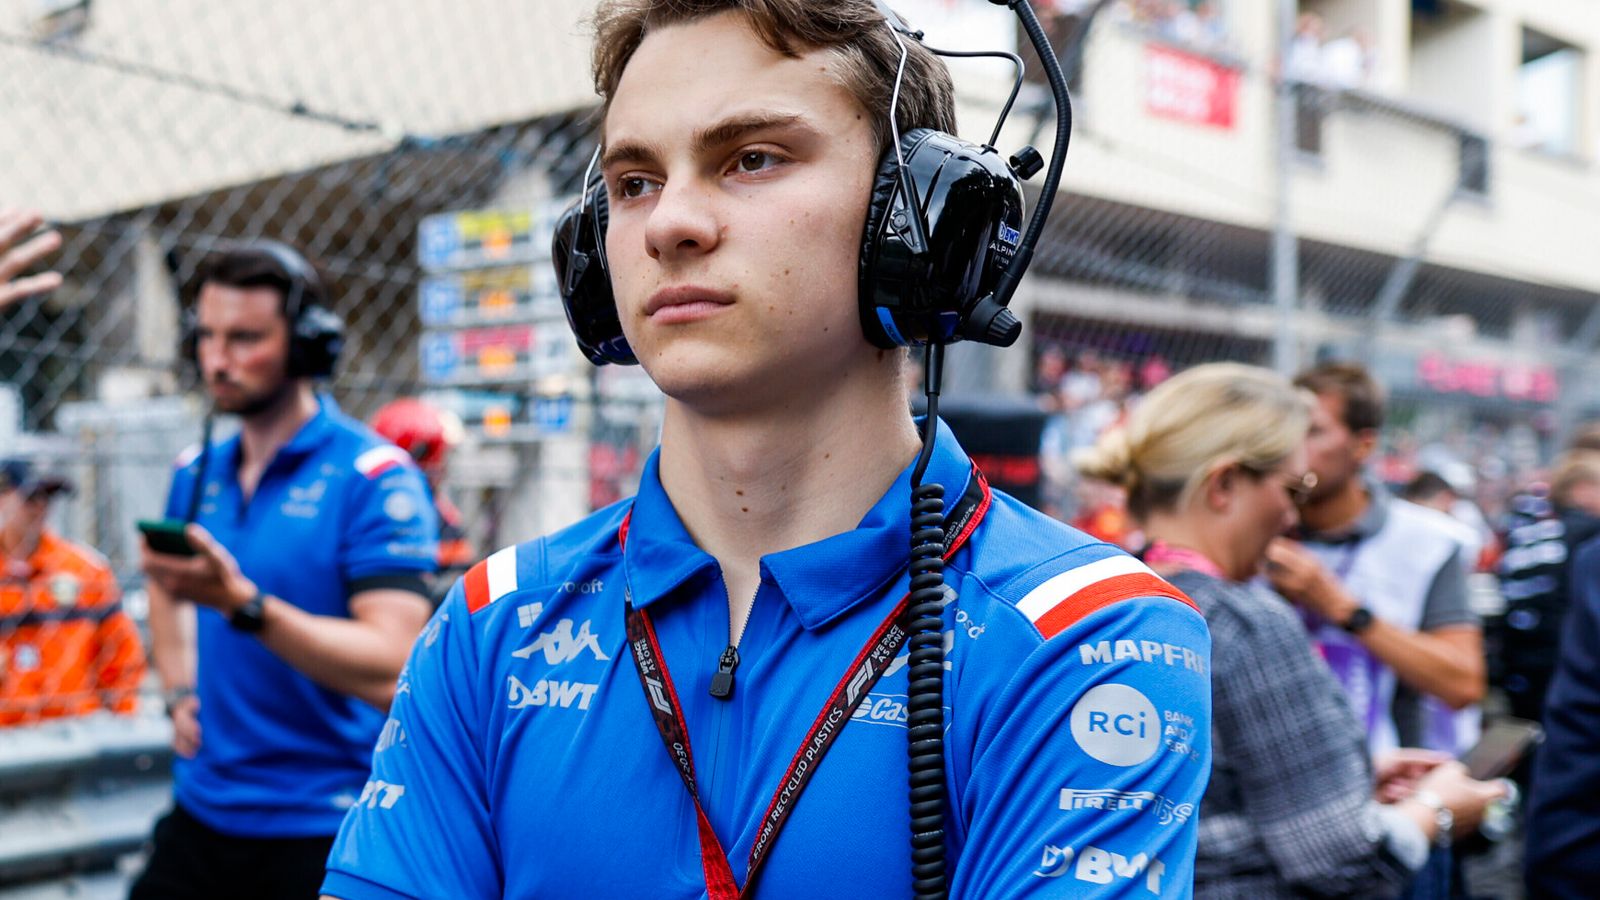 Oscar Piastri to drive for McLaren in 2023 as Alpine lose Formula 1 contract battle